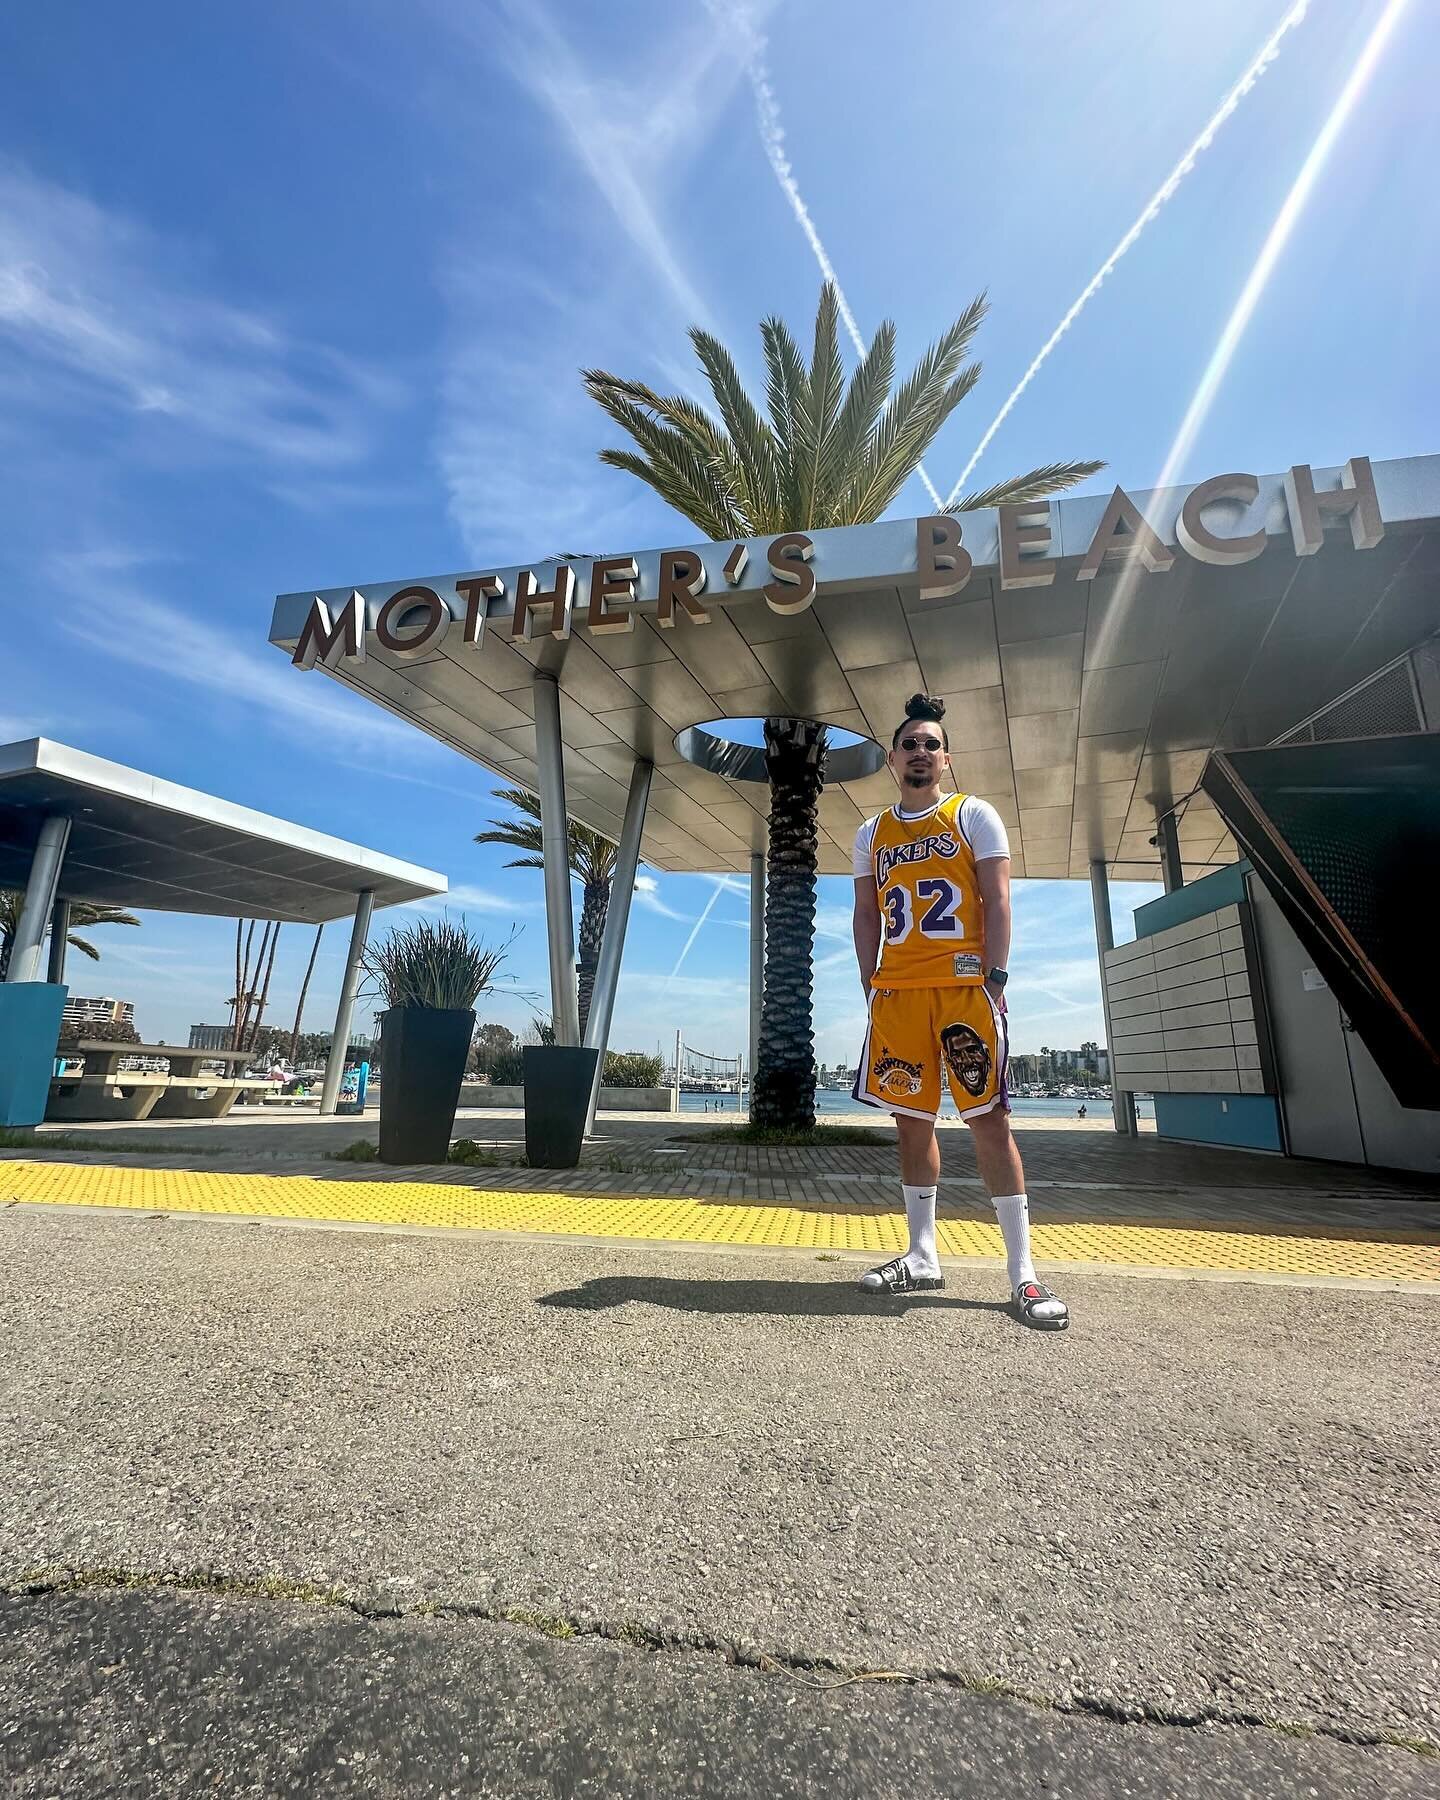 #FlashbackFriday I felt nostalgic so I returned to the very first beach I ever visited when I moved to LA.

#MothersBeach #LosAngeles #Lakers #Outside

📸 &amp; Hair: 🥰